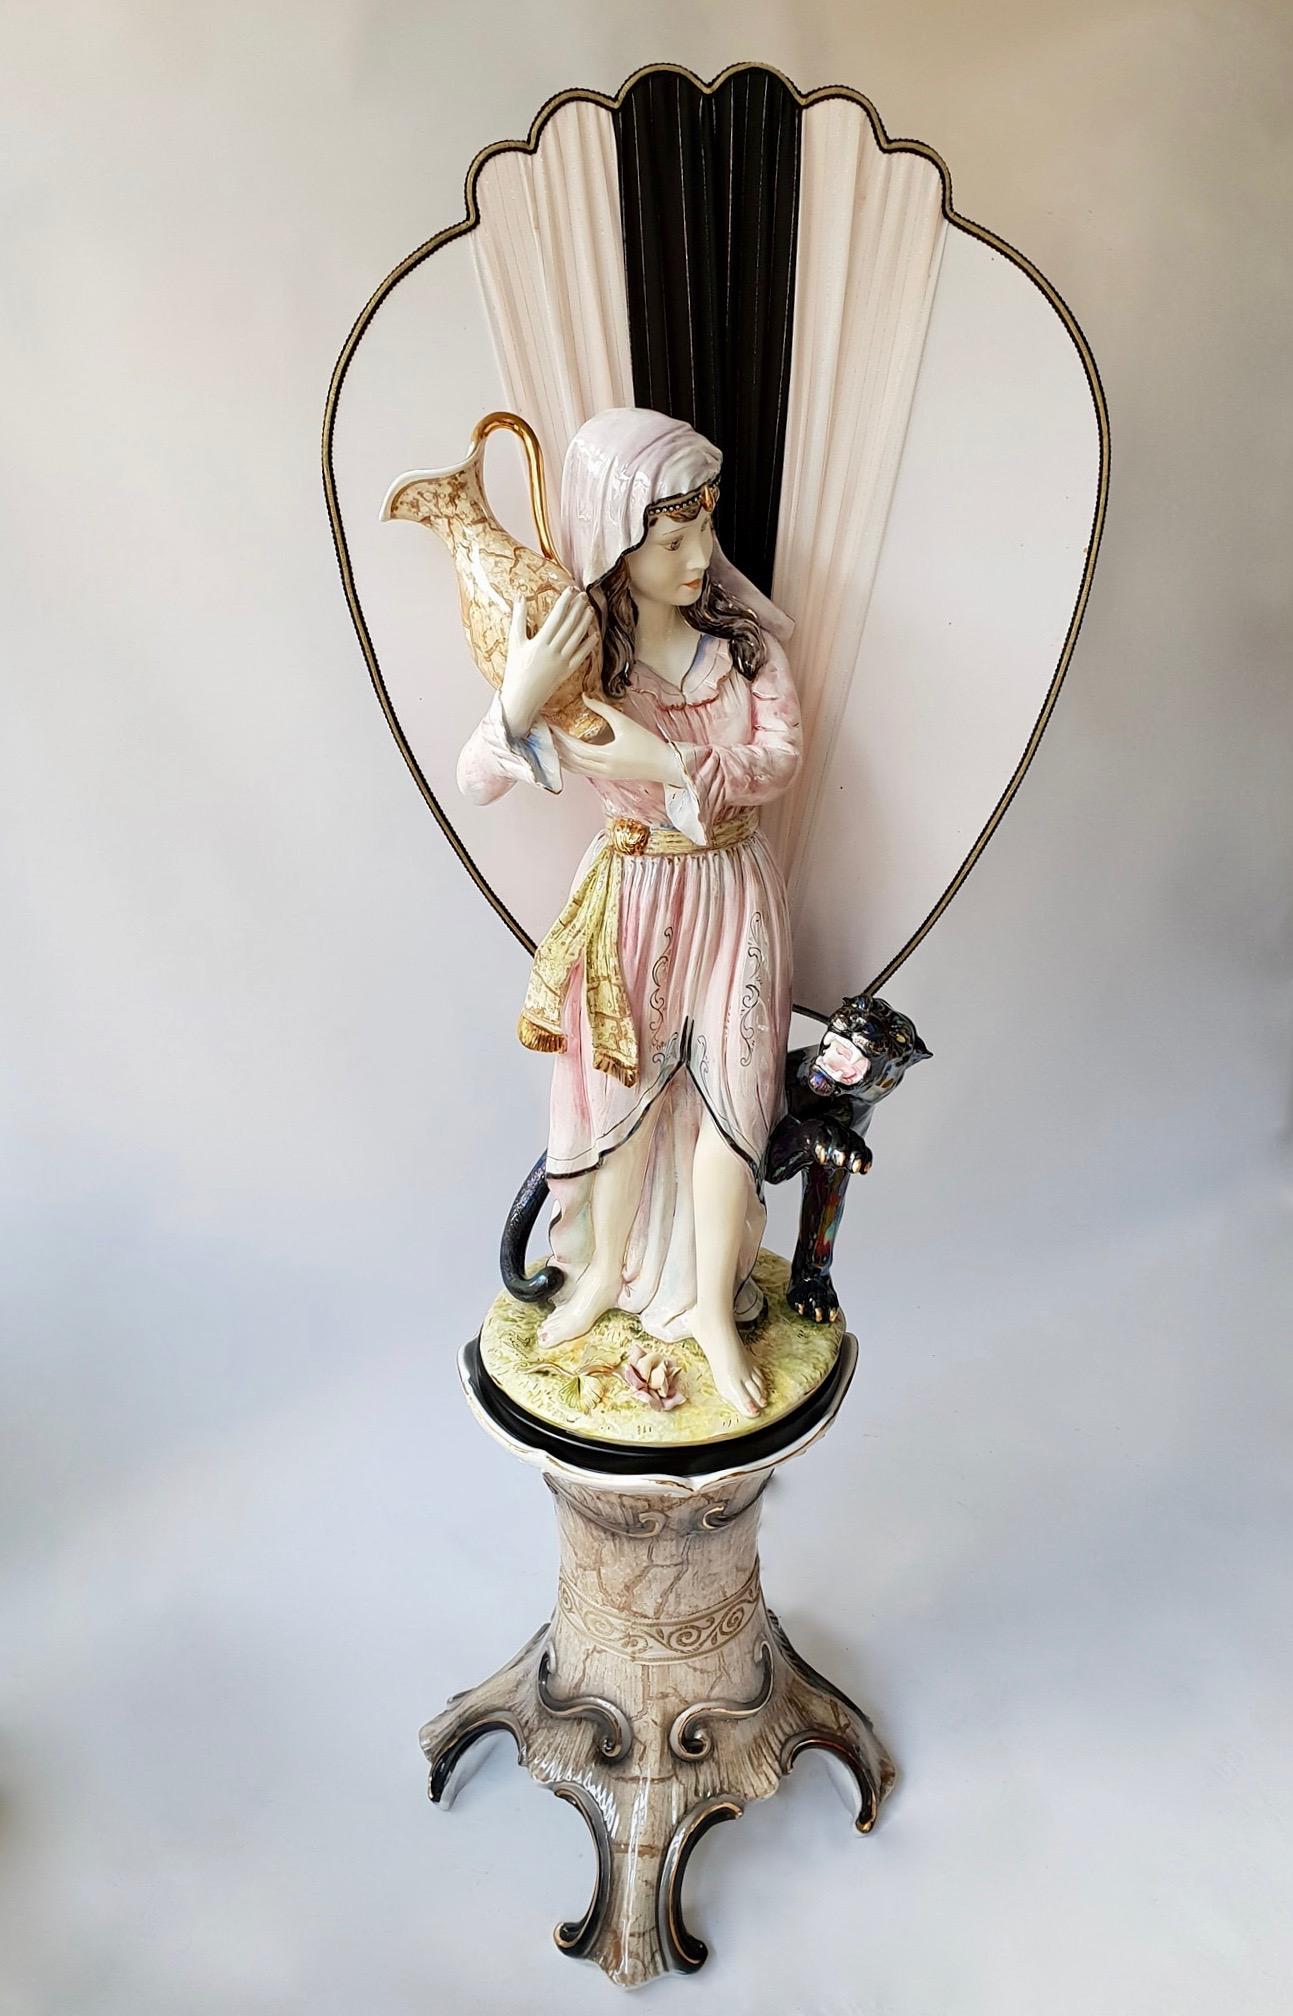 Italian porcelain floor lamp on a pedestal with a woman and panther.
Made in Italy 1970s and signed.
Measures: Height 174 cm.
Width 62 cm.
Depth 47 cm.
Height column 59 cm.
Width 47 cm. Depth 47 cm.
One E27 bulb.